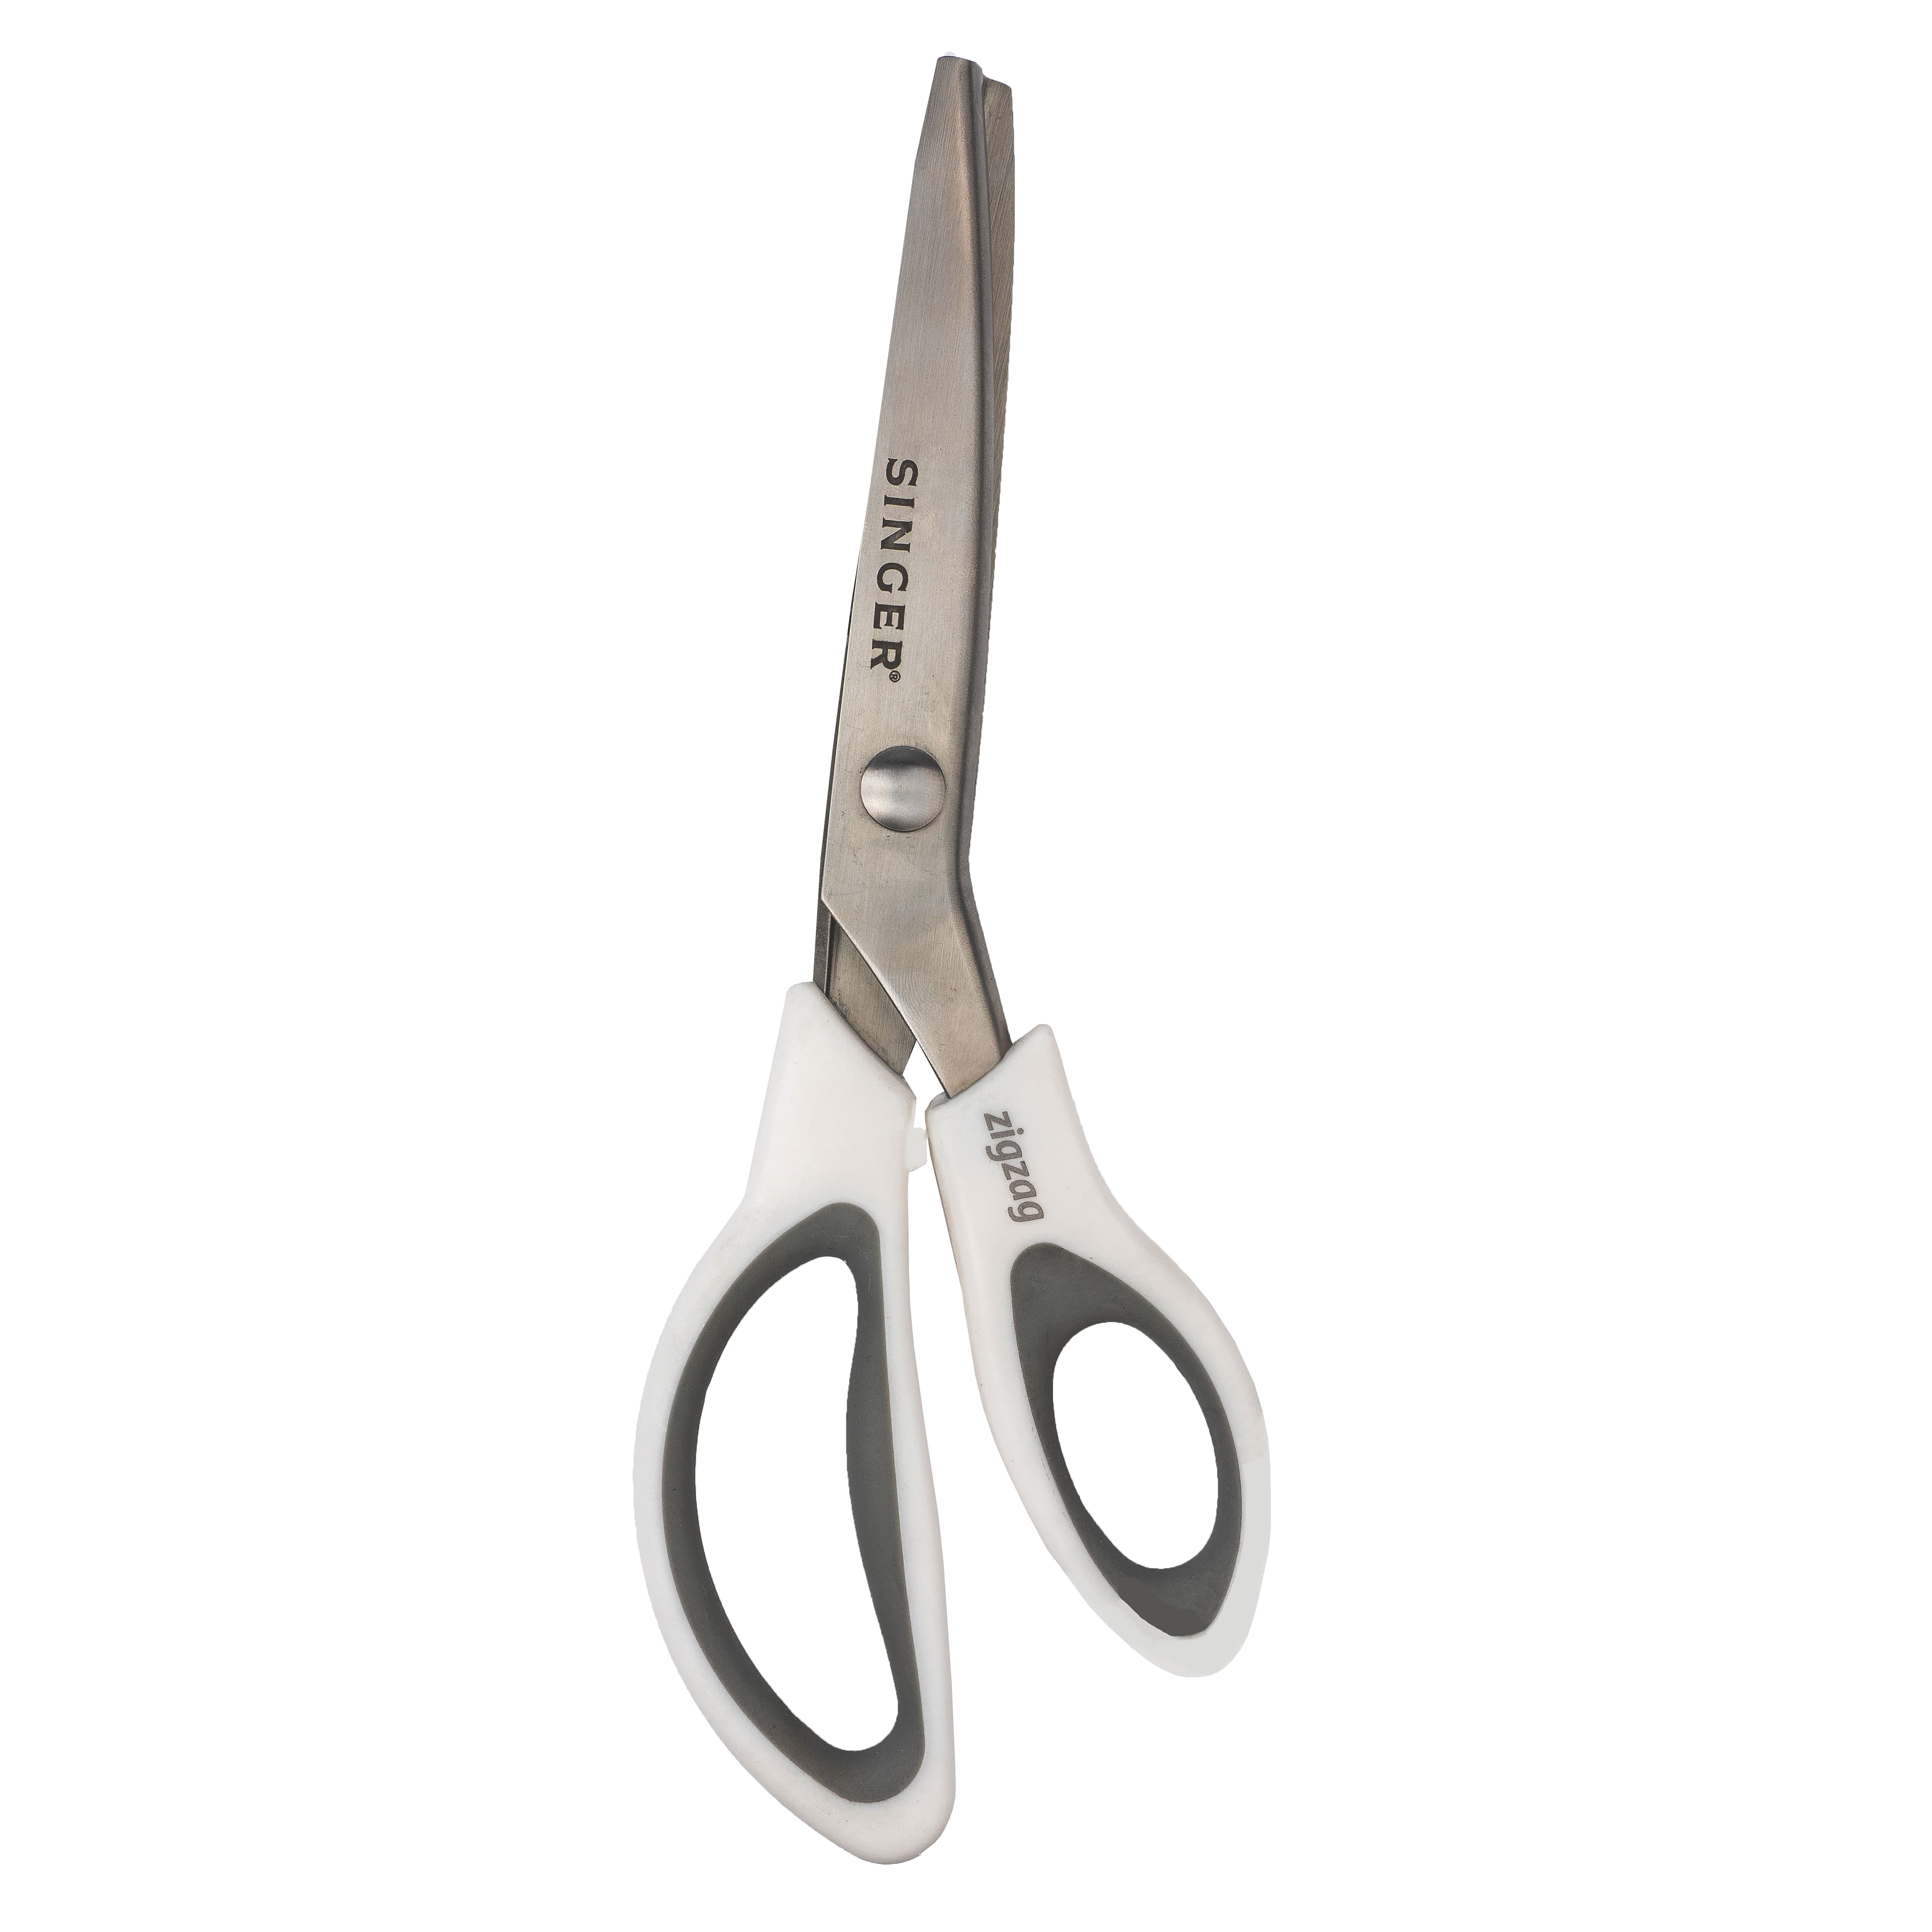 Professional Pinking Shears, 9 Stainless Steel Fabric Pinking Shears, by Better Office Products, Dressmaking Scissors, Zig Zag Cut Scissors, Serrated